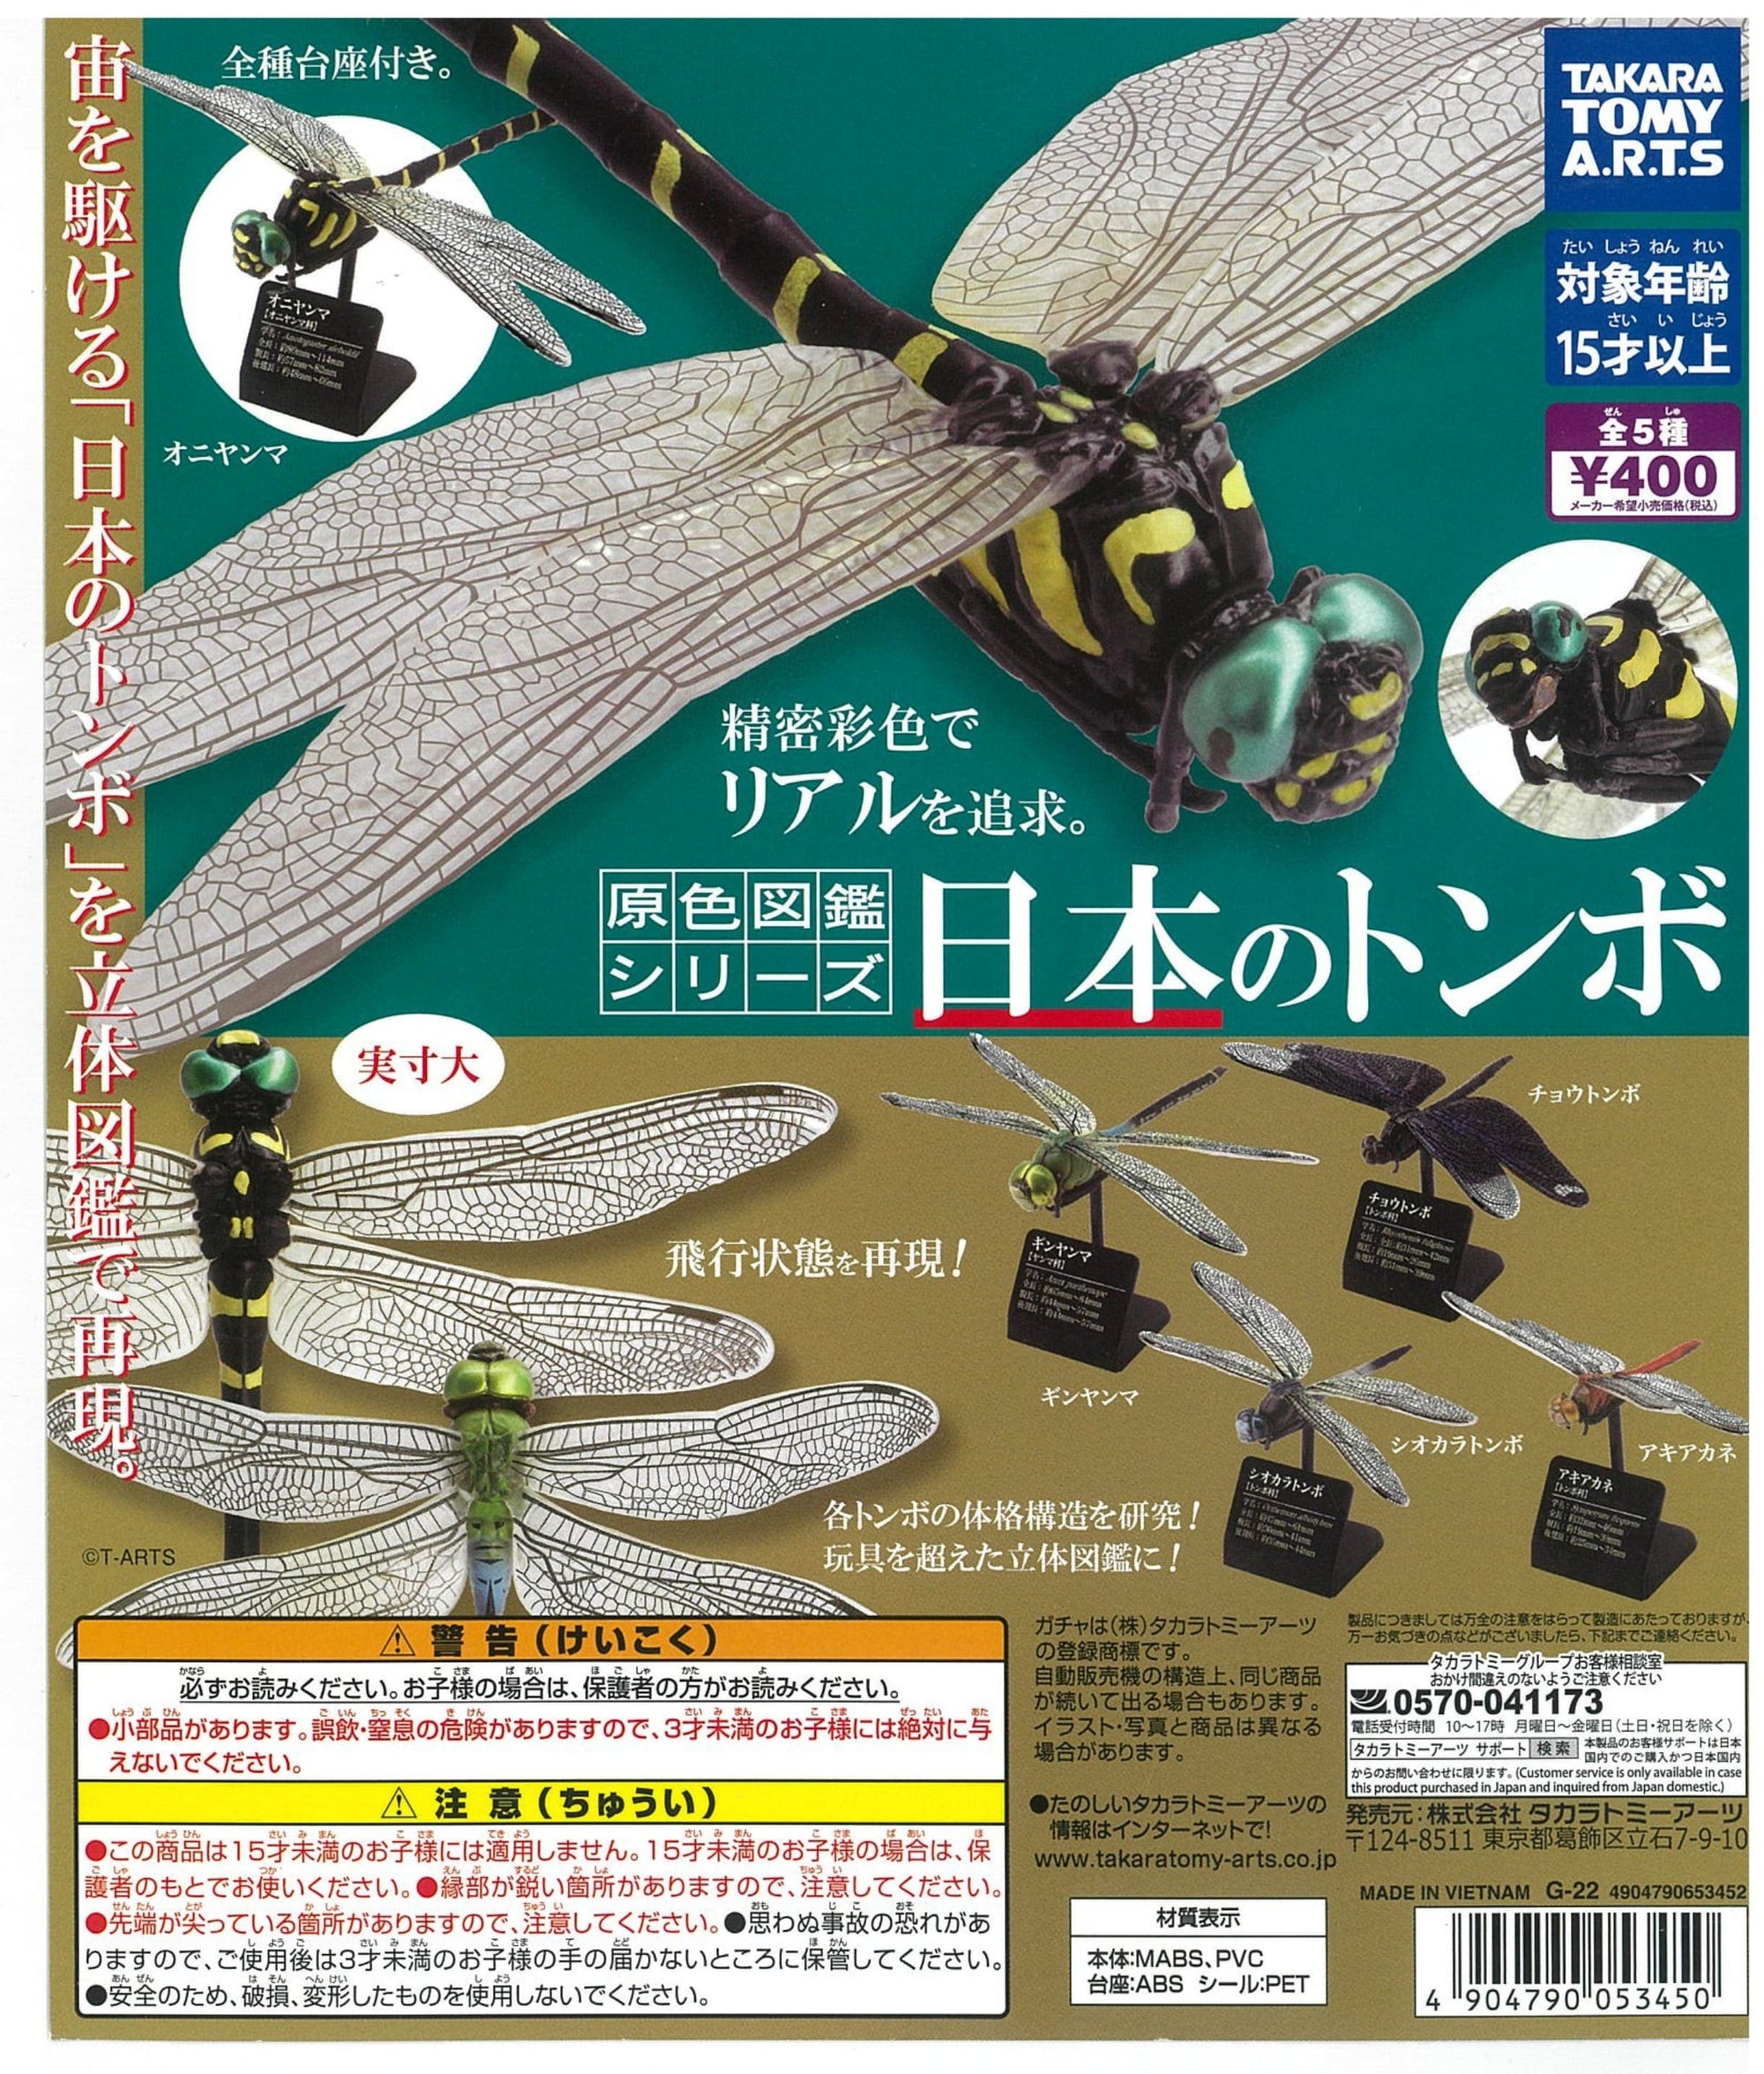 Takara Tomy A.R.T.S CP2133 Primary Color Visual Diconary Series Japanese Dragonfly